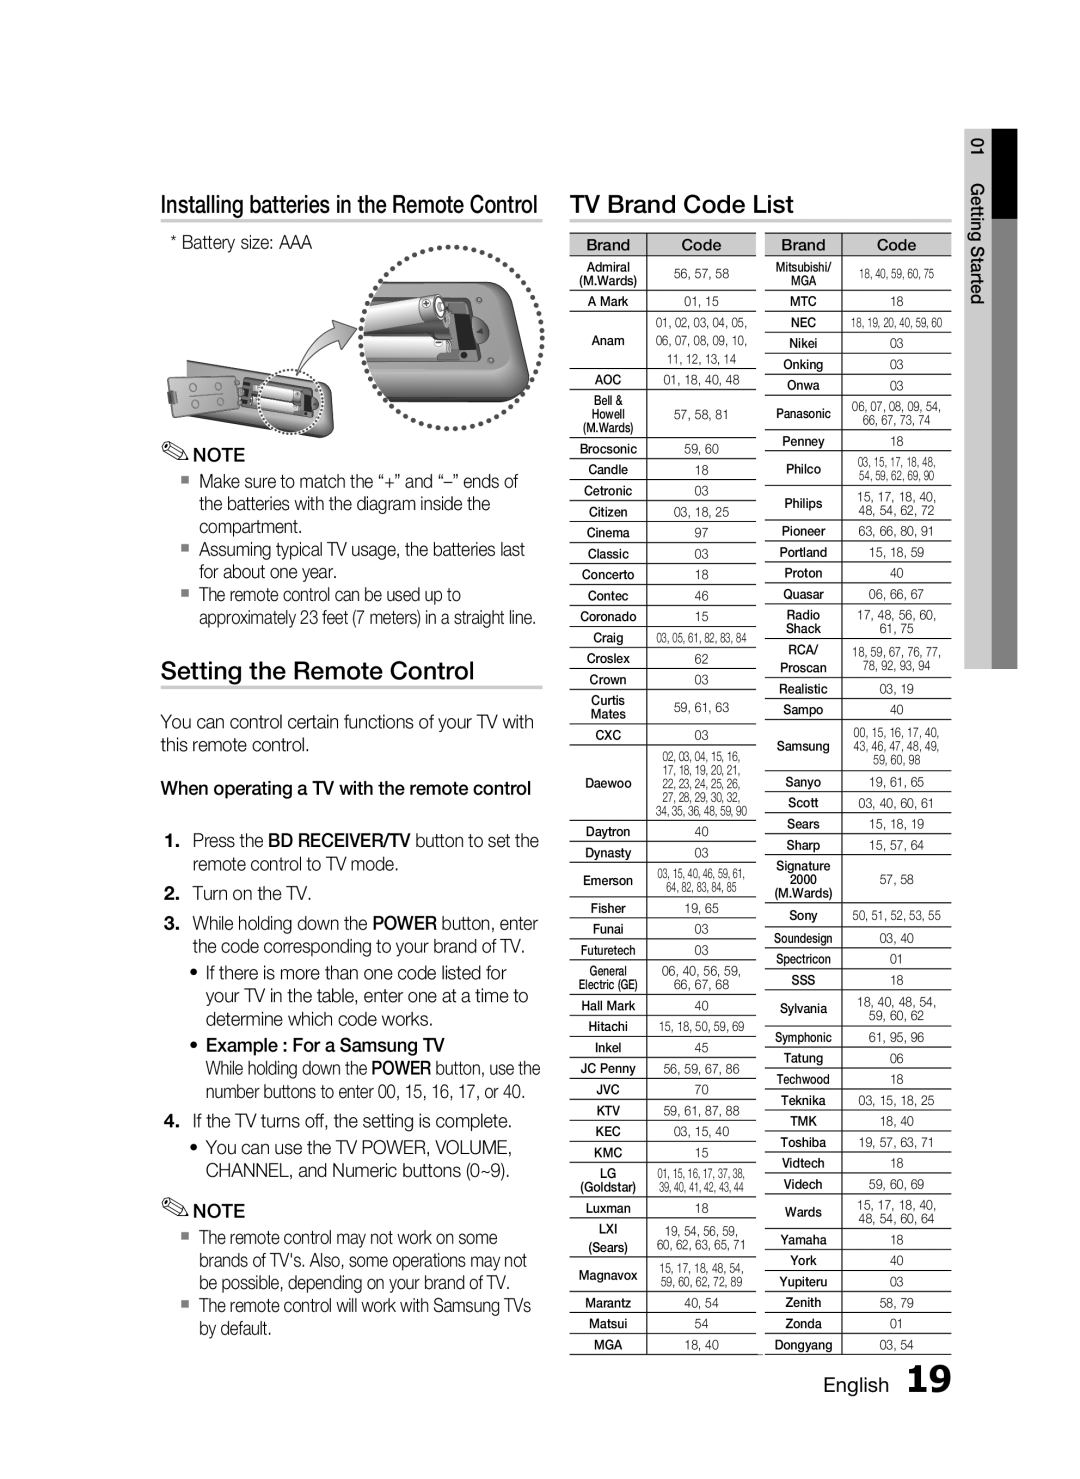 Samsung C6600 TV Brand Code List, Setting the Remote Control, Installing batteries in the Remote Control, English 